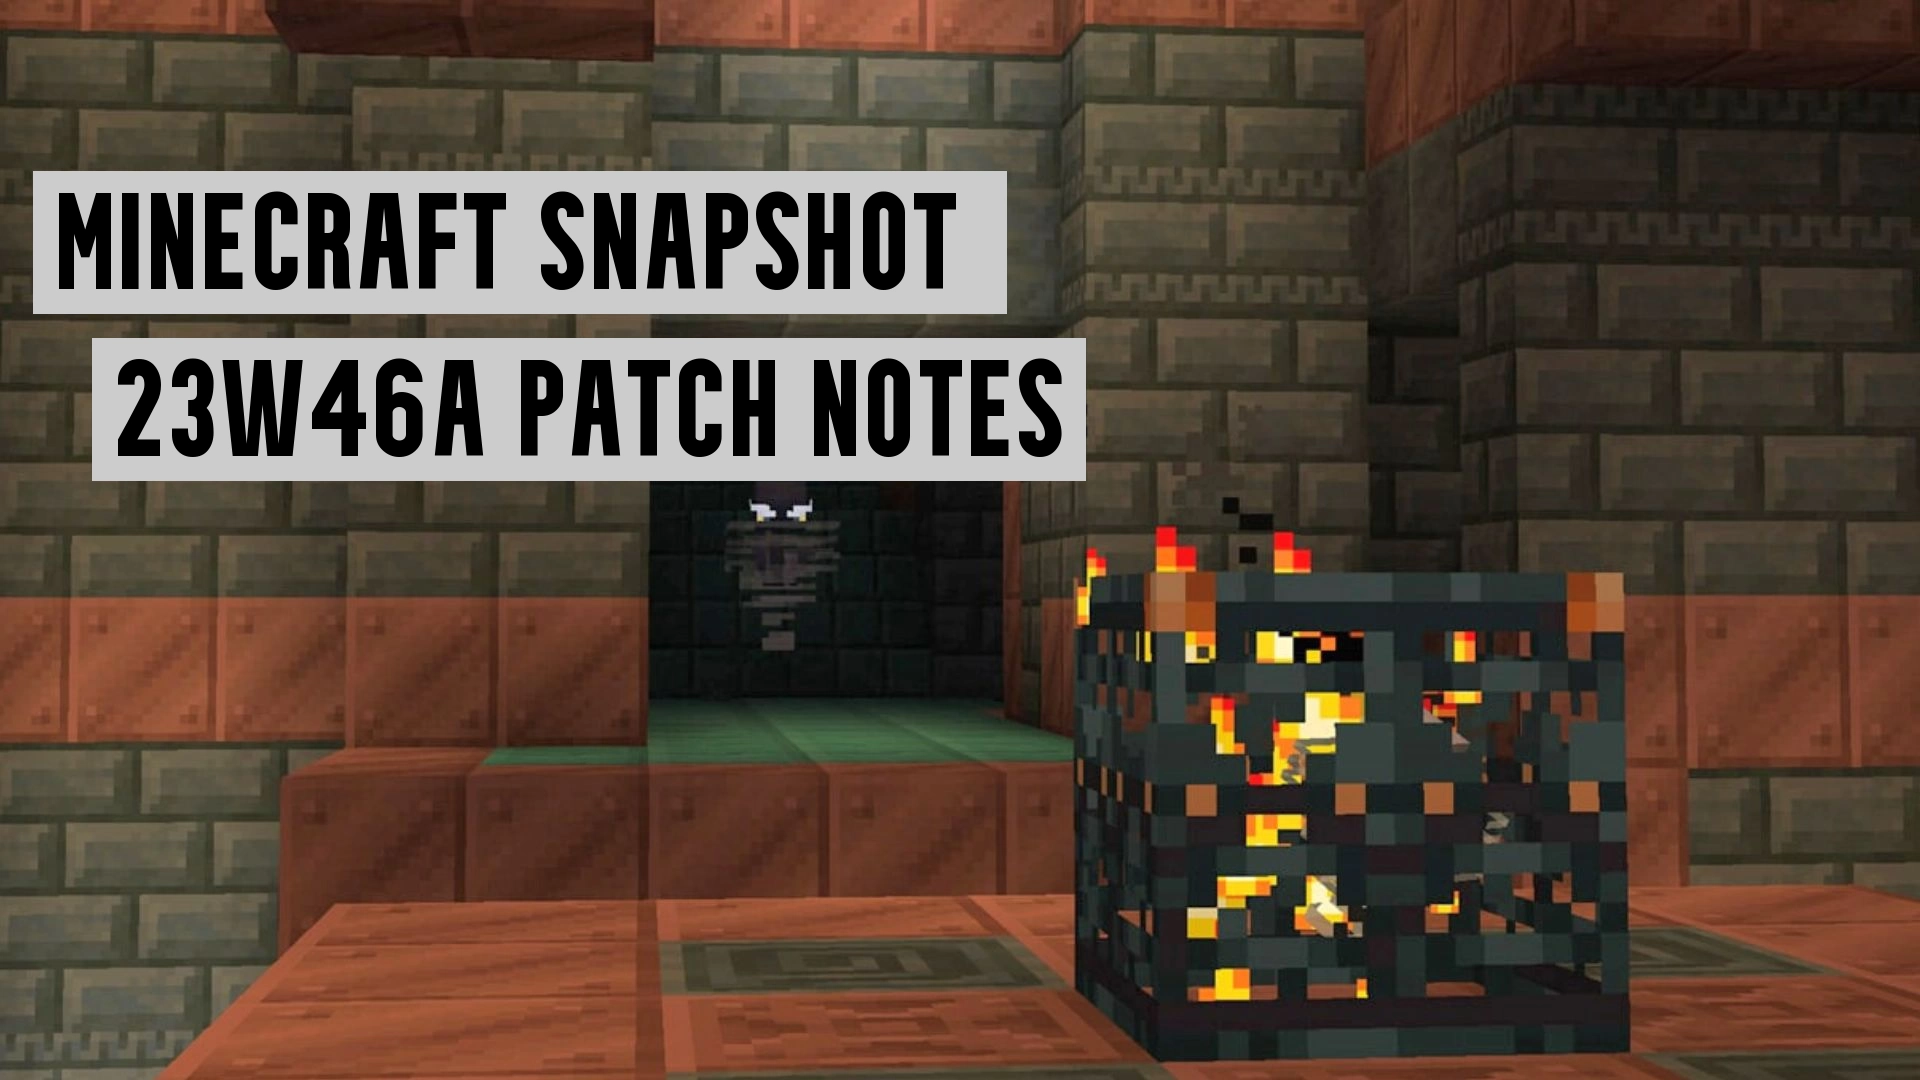 Patch Notes in Minecraft Snapshot 23w46a